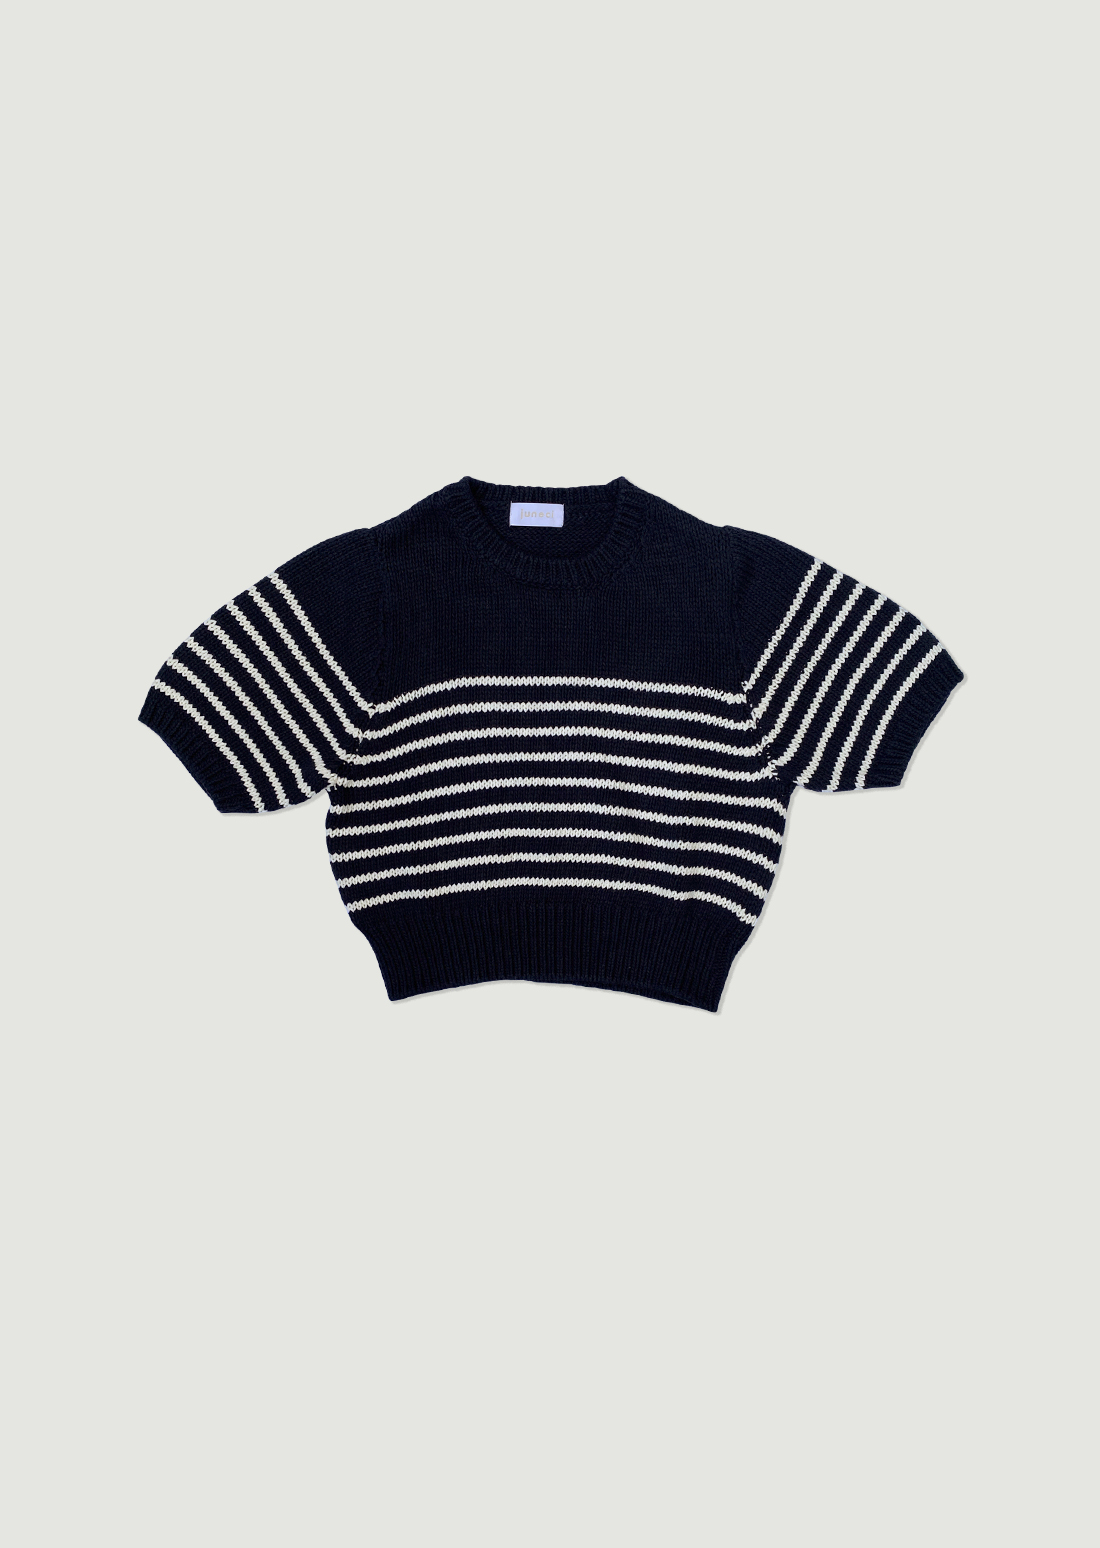 Classic Striped Knit Top (Navy)